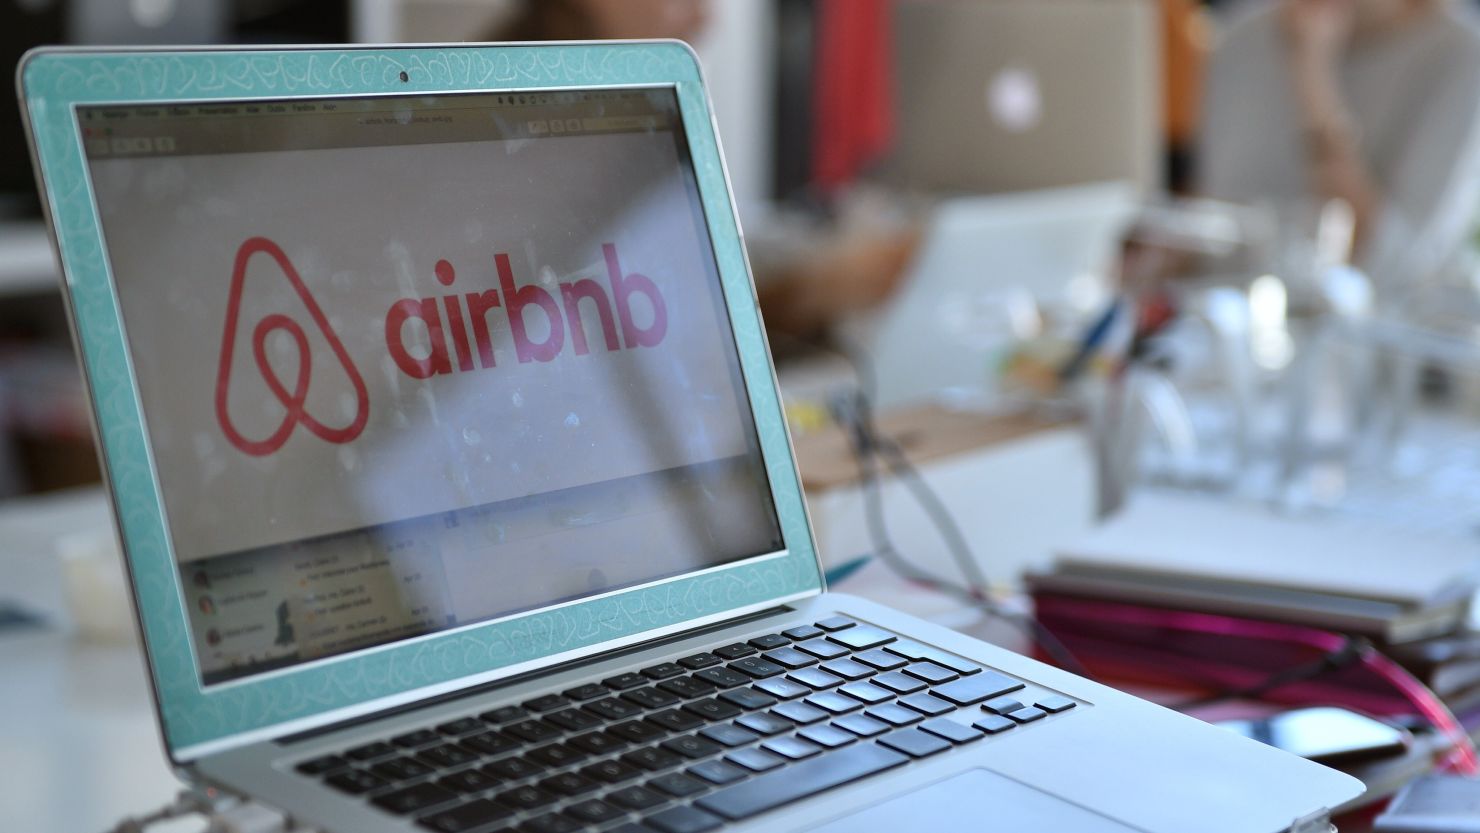 Friends who rented an Airbnb home in France found a woman's body.